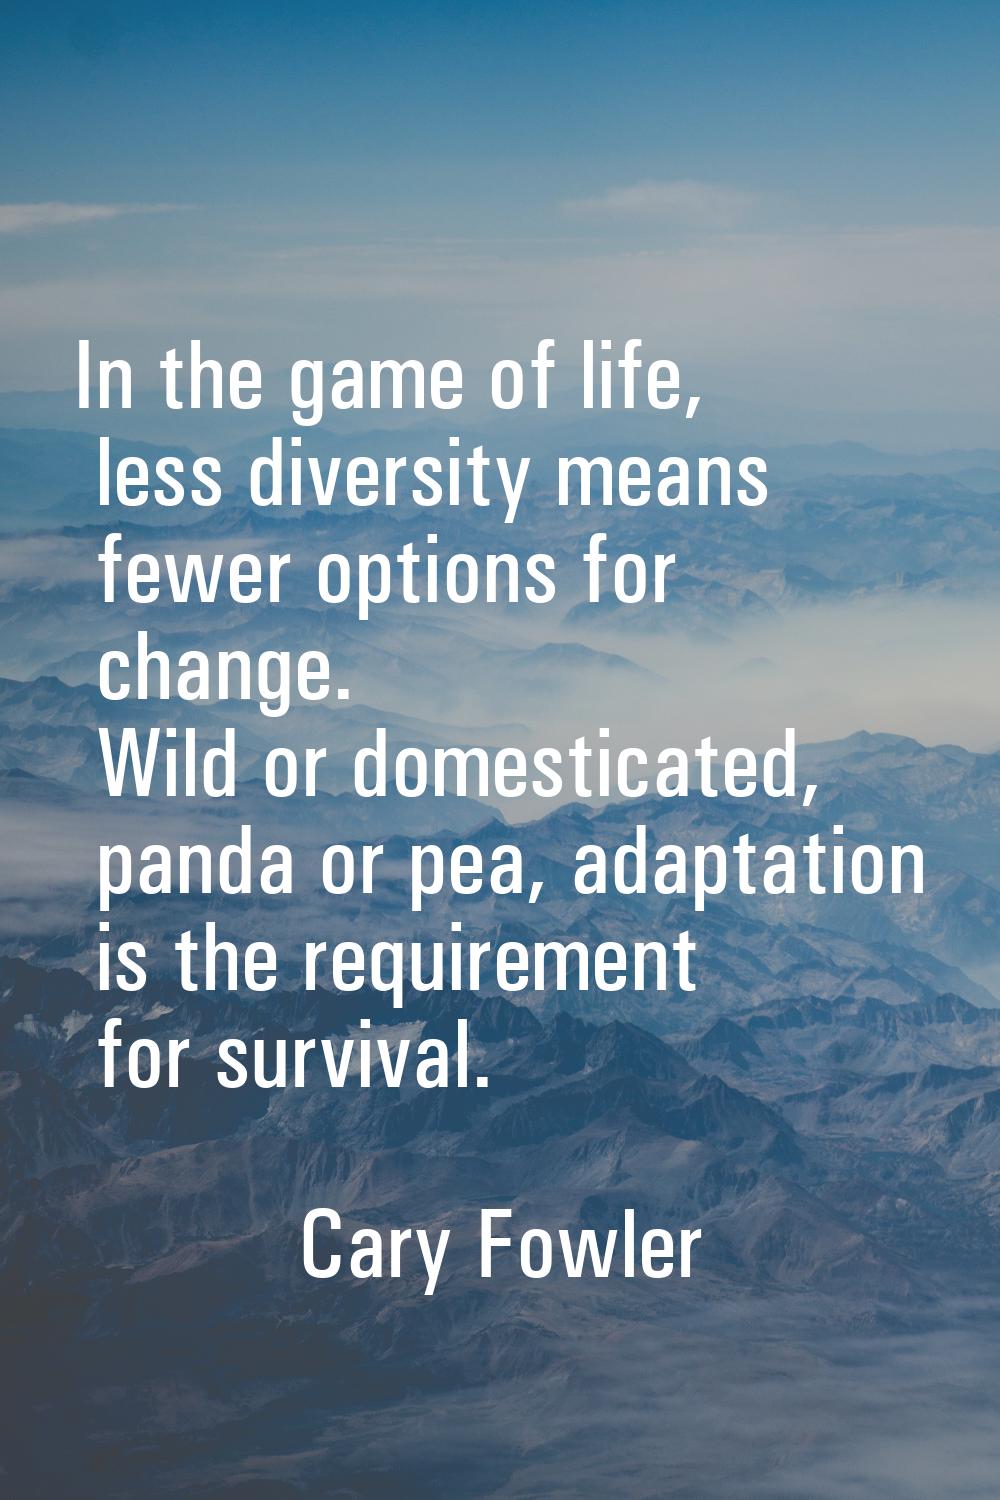 In the game of life, less diversity means fewer options for change. Wild or domesticated, panda or 